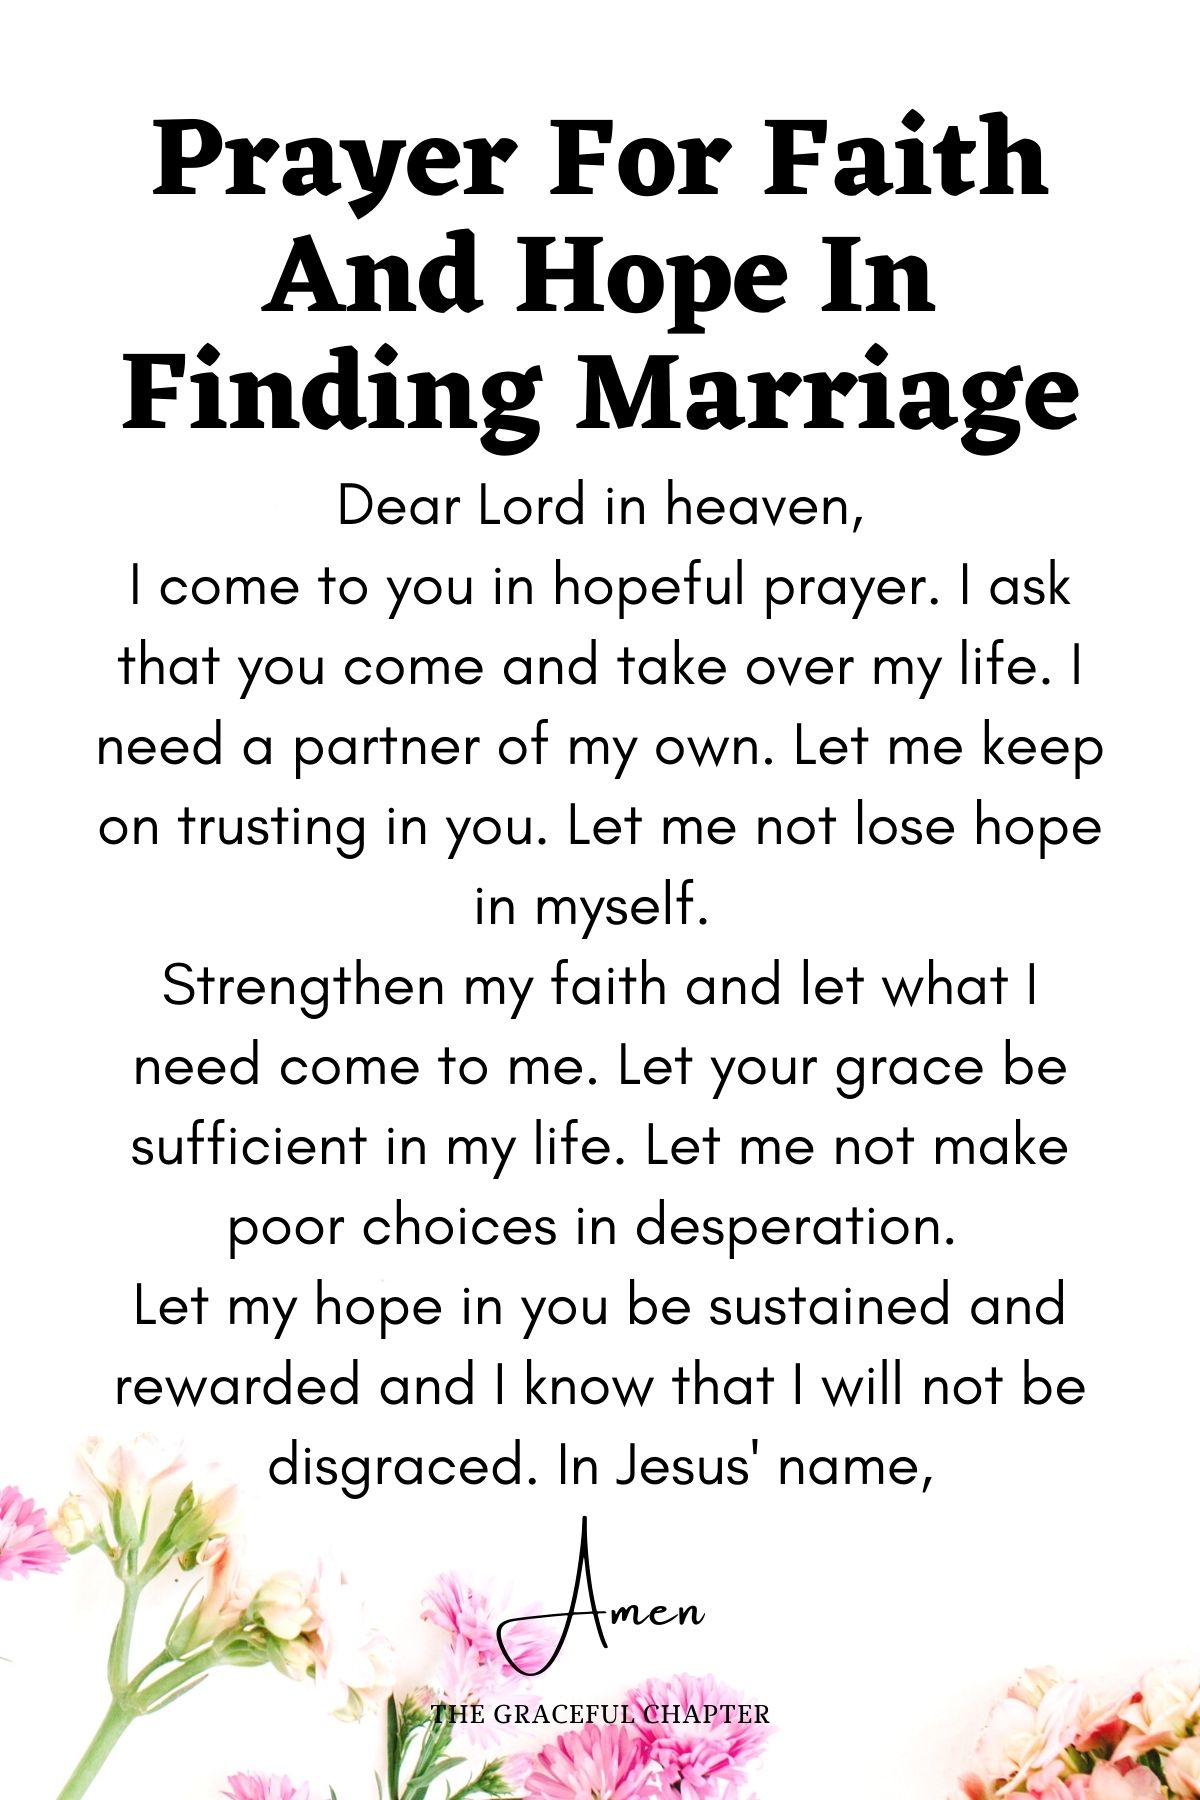 Prayer for faith and hope in finding marriage